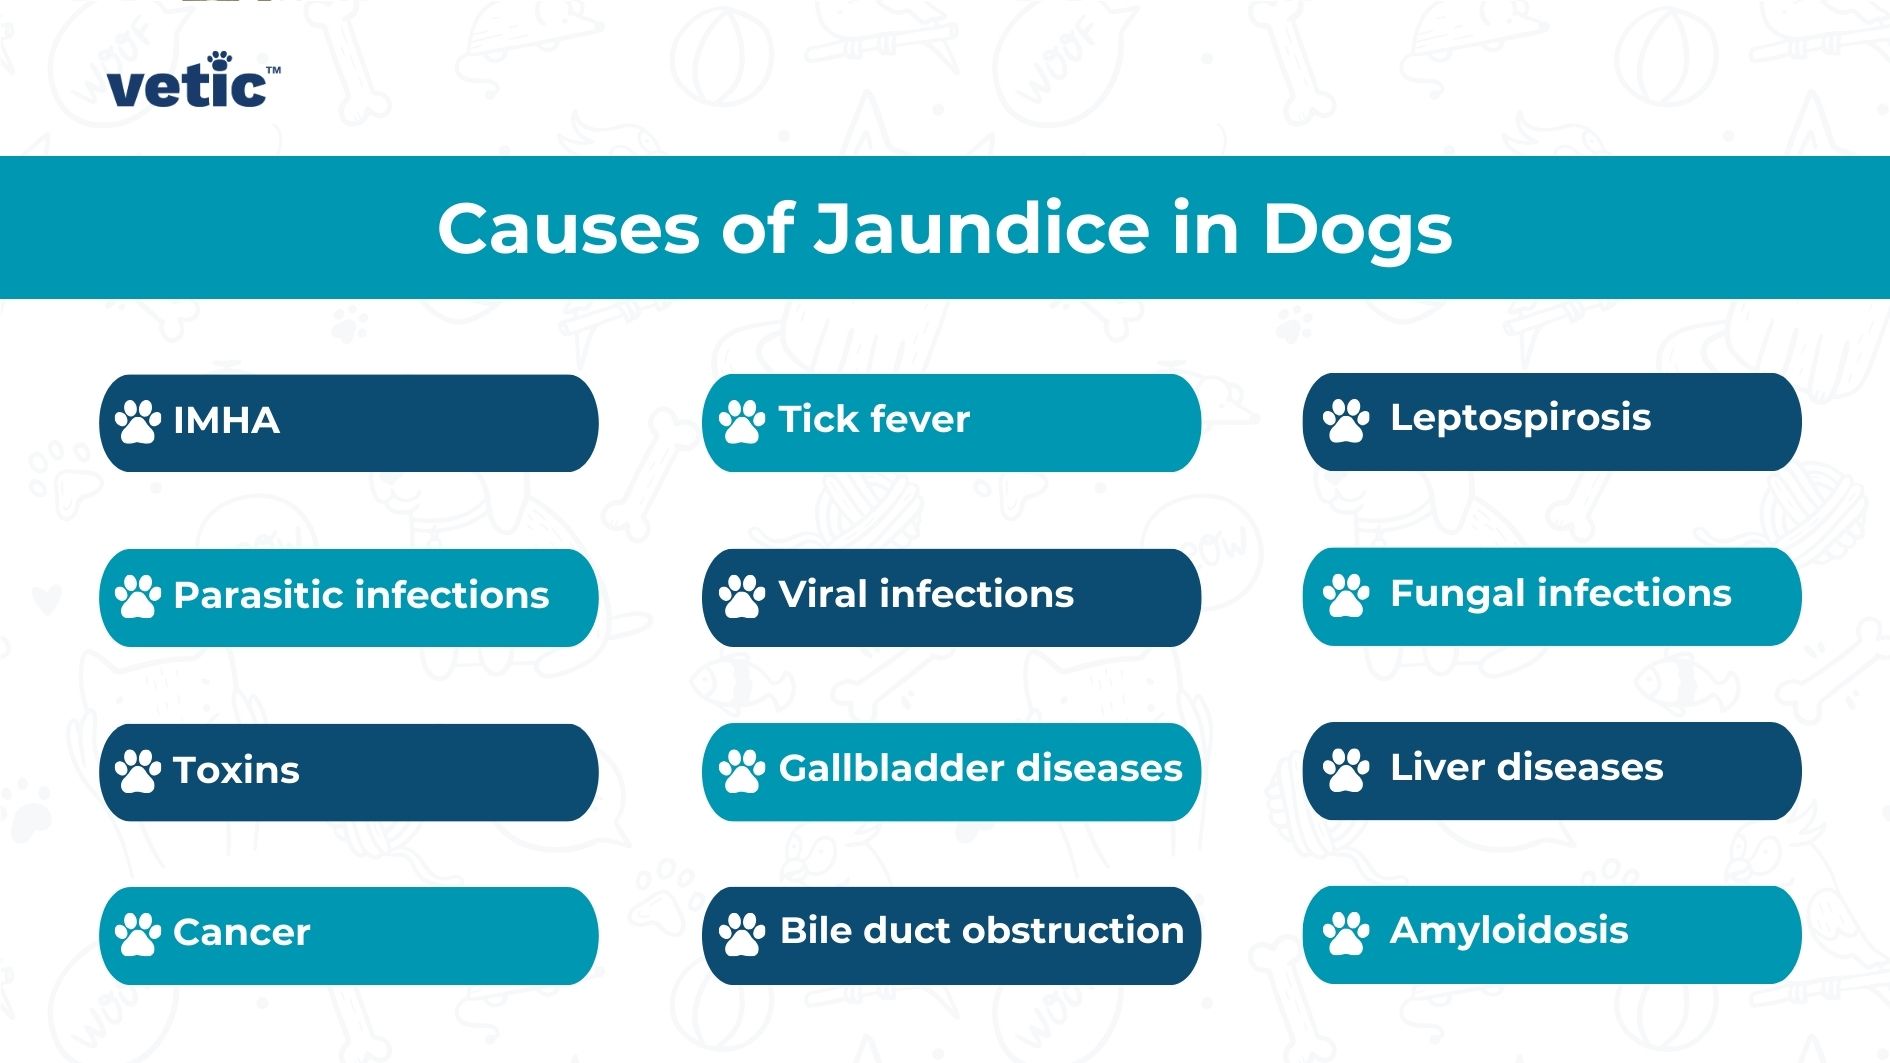 The image is a visual representation of various causes of jaundice in dogs. It’s presented in a clean and organized manner with a light blue background. The title “Causes of Jaundice in Dogs” is prominently displayed at the top. There are twelve different causes listed: IMHA, Tick fever, Leptospirosis, Parasitic infections, Viral infections, Fungal infections, Toxins, Gallbladder diseases, Liver diseases, Cancer, Bile duct obstruction, and Amyloidosis. Each cause is accompanied by an icon of a paw print. The Vetic logo is visible at the top left corner.